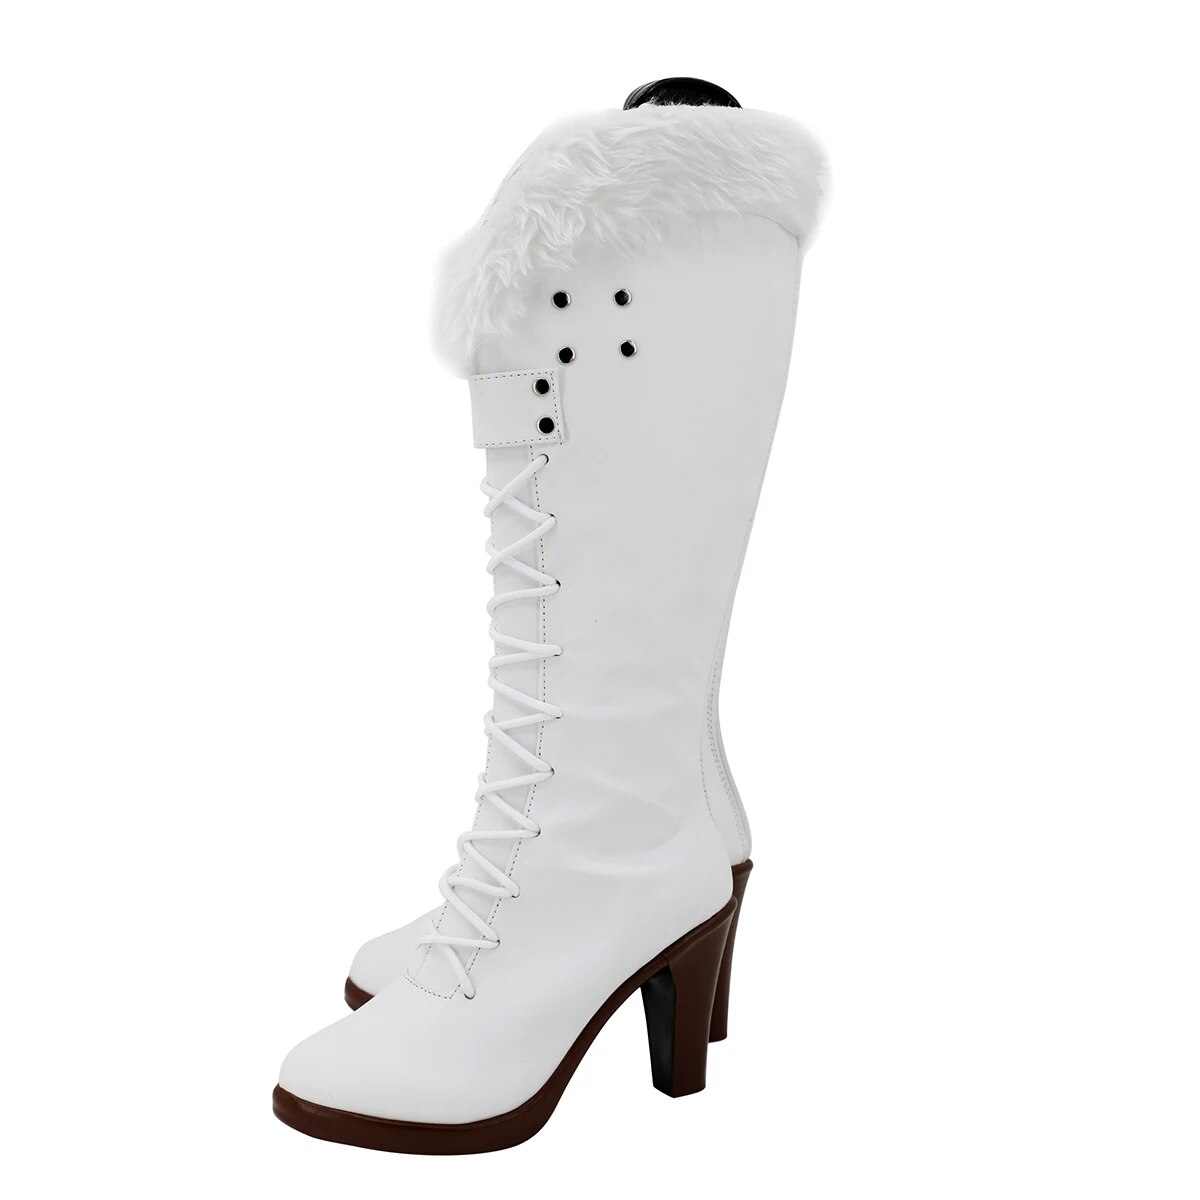 Anime One Piece Nico Robin Cosplay Boots Updated White Shoes High Heel Custom Made Any Size